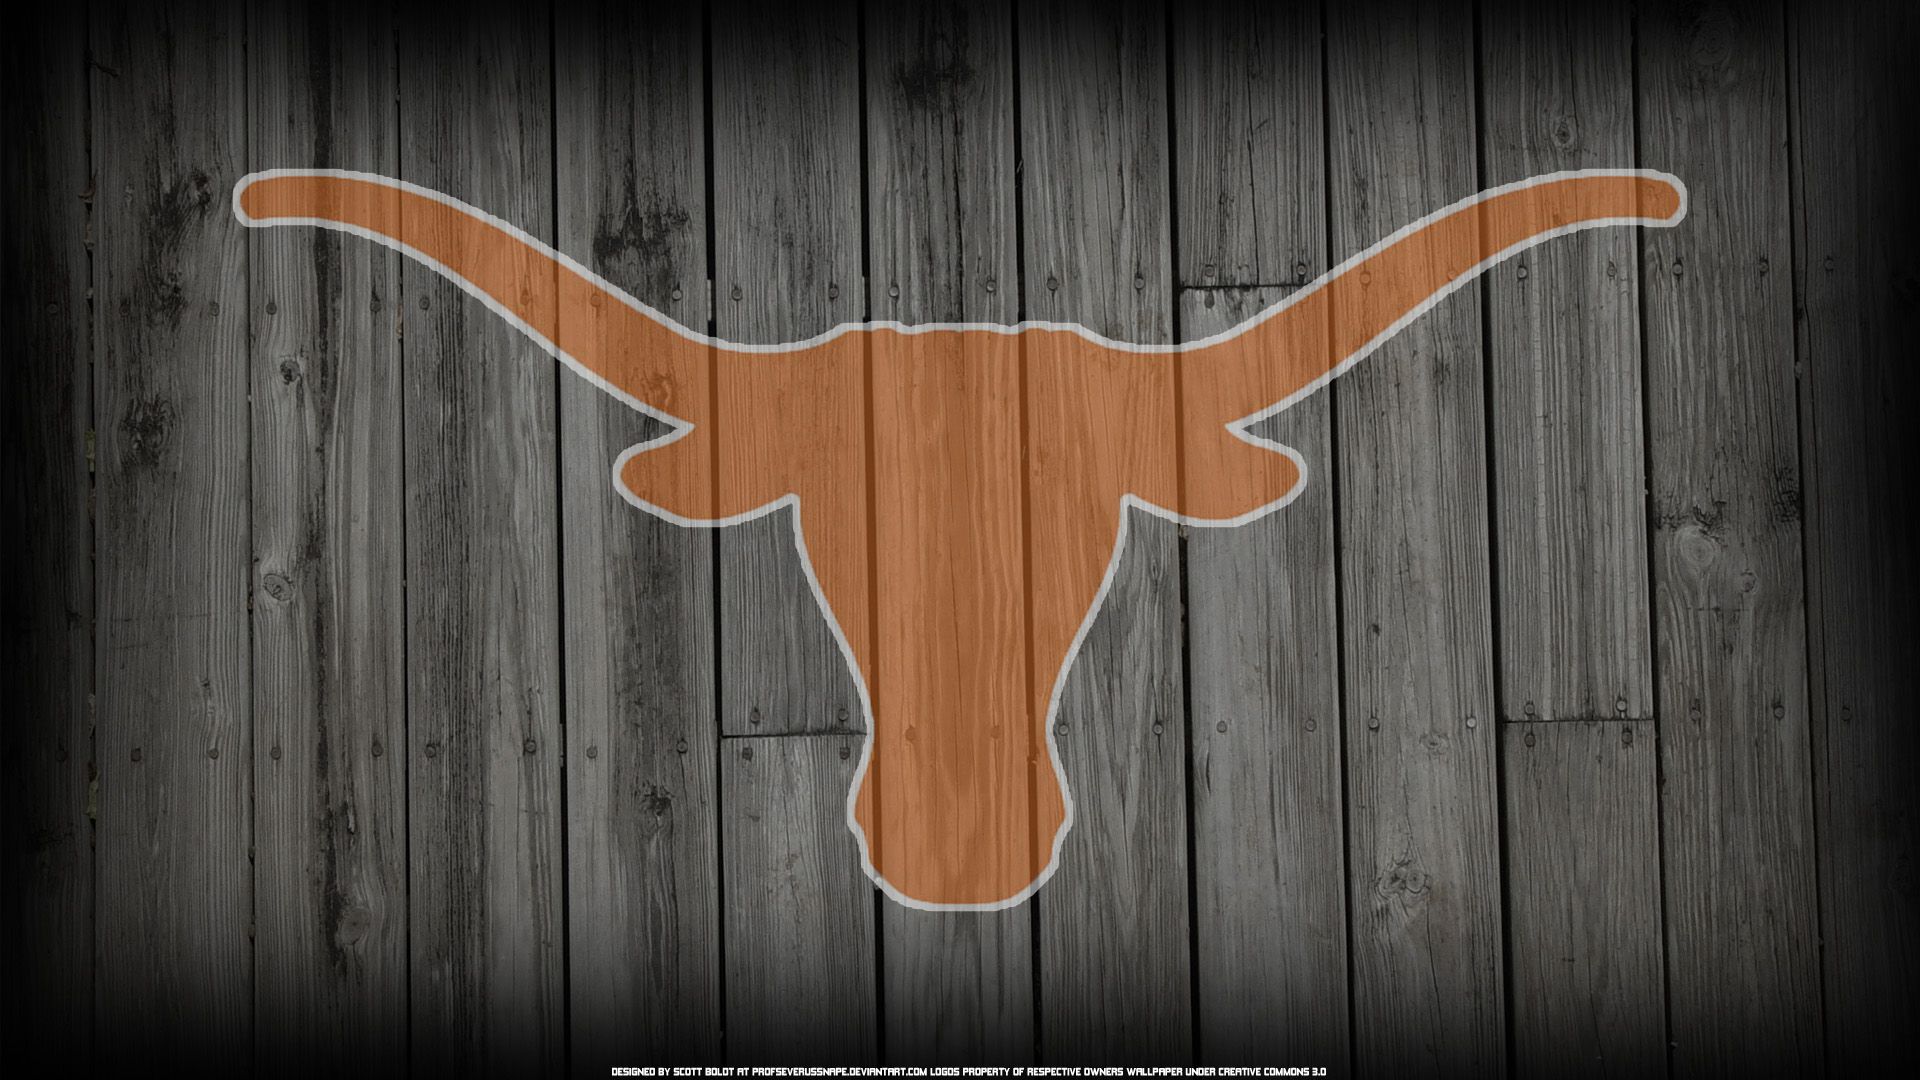 A wooden background with the texas longhorns logo - Texas